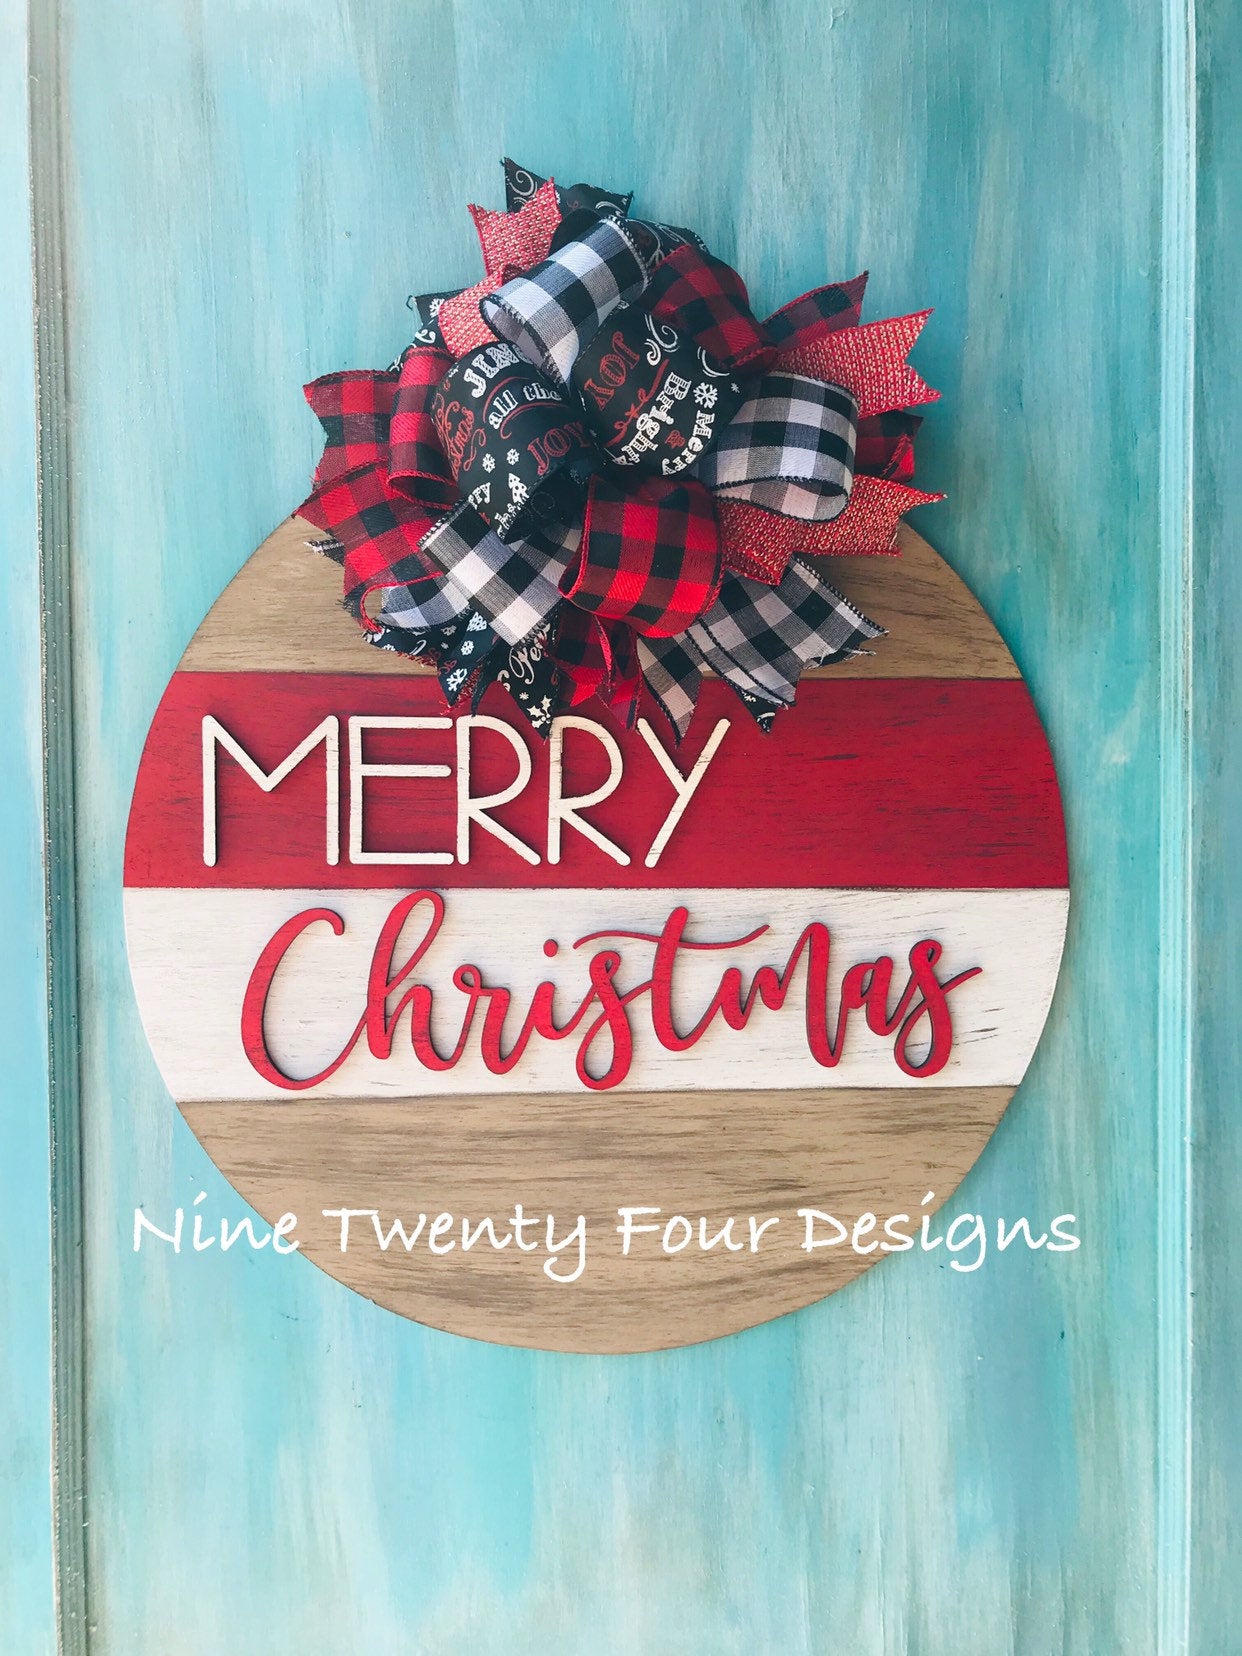 Merry Christmas 3D round sign, chistmas door hanger, christmas, holiday decor, christmas decor